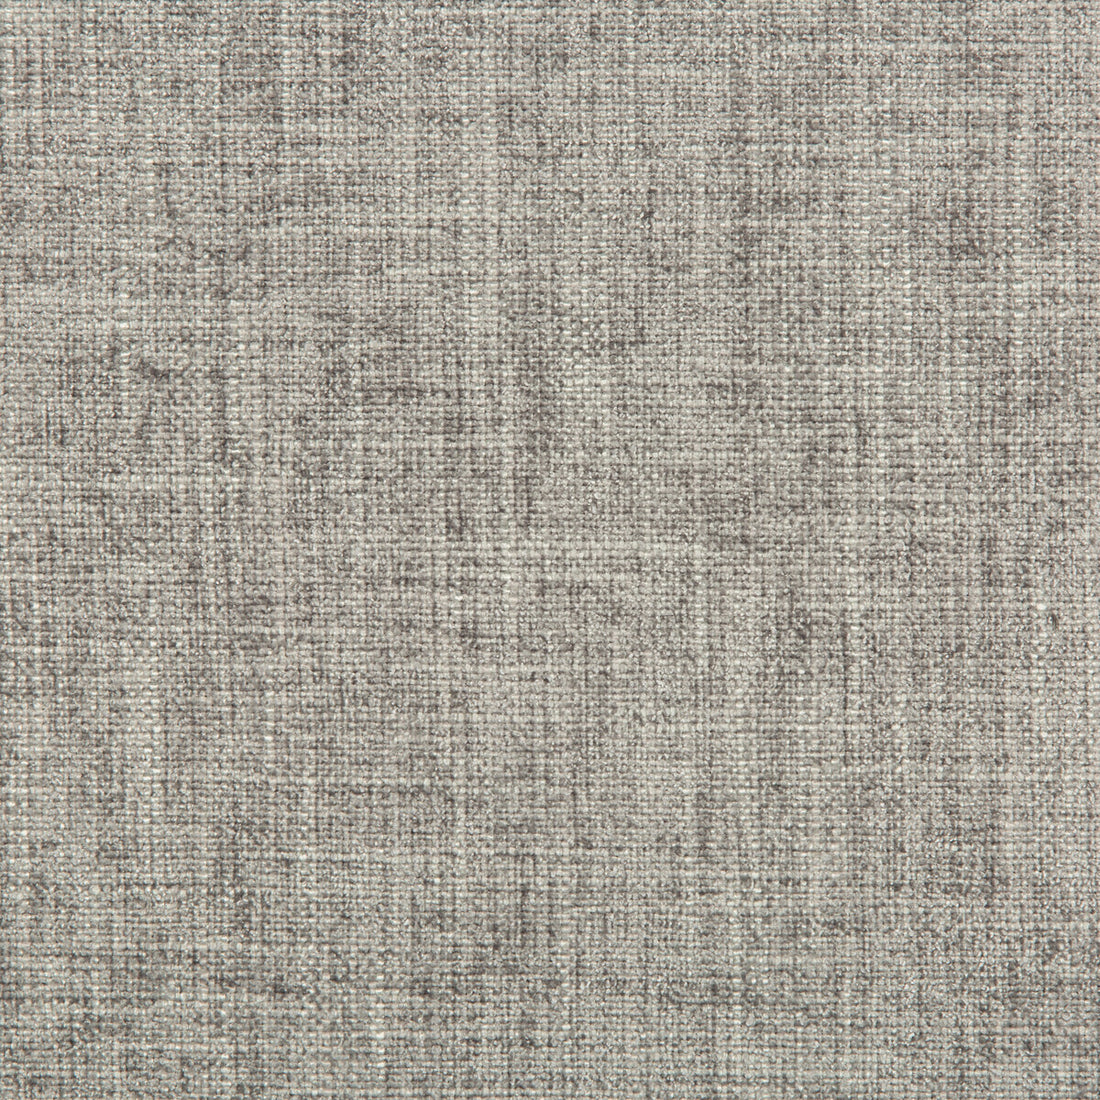 Allstar fabric in graphite color - pattern 34299.21.0 - by Kravet Basics in the Sarah Richardson Harmony collection